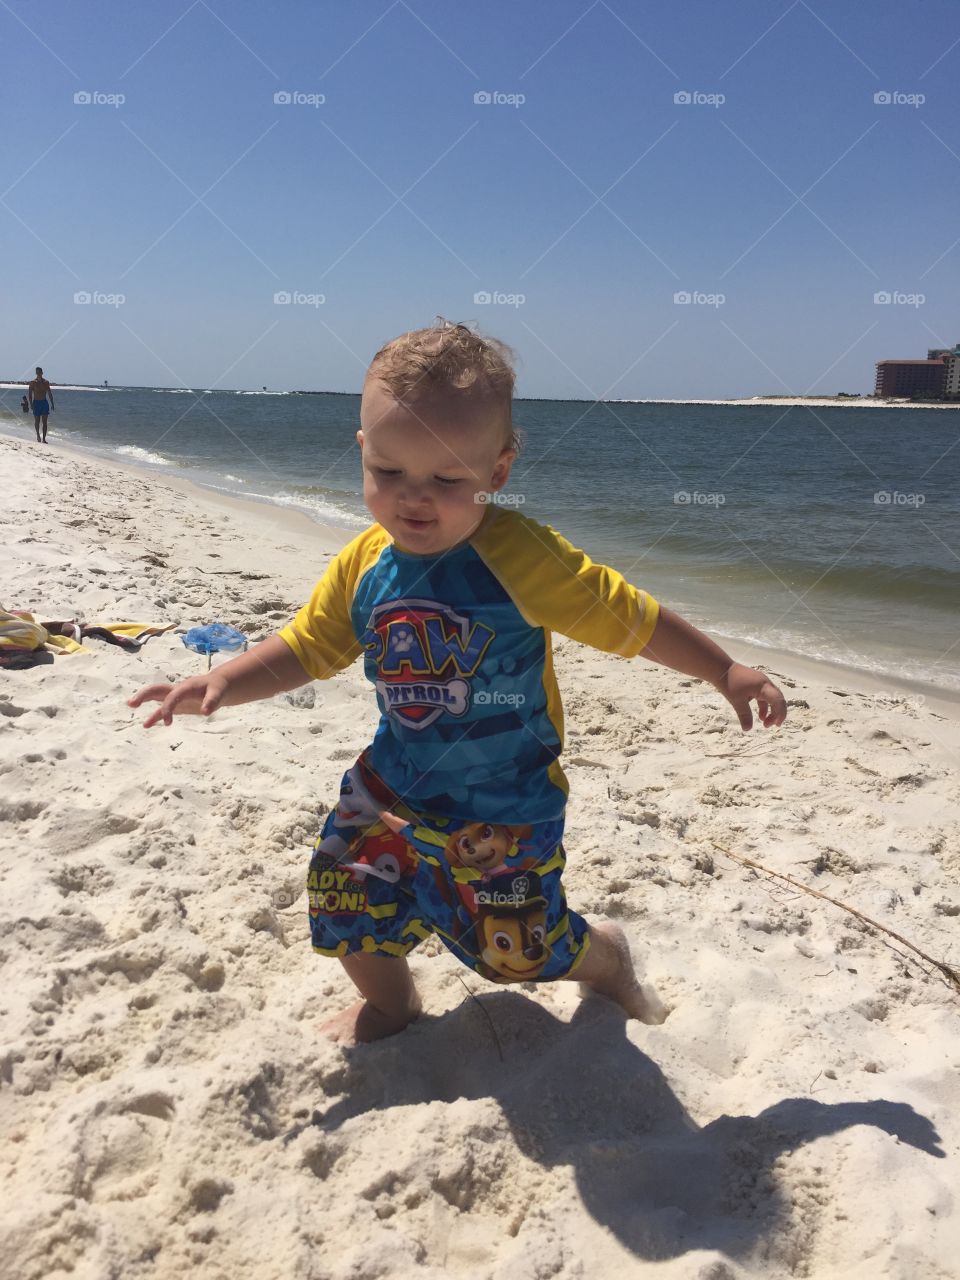 Grandson playing on the beach
